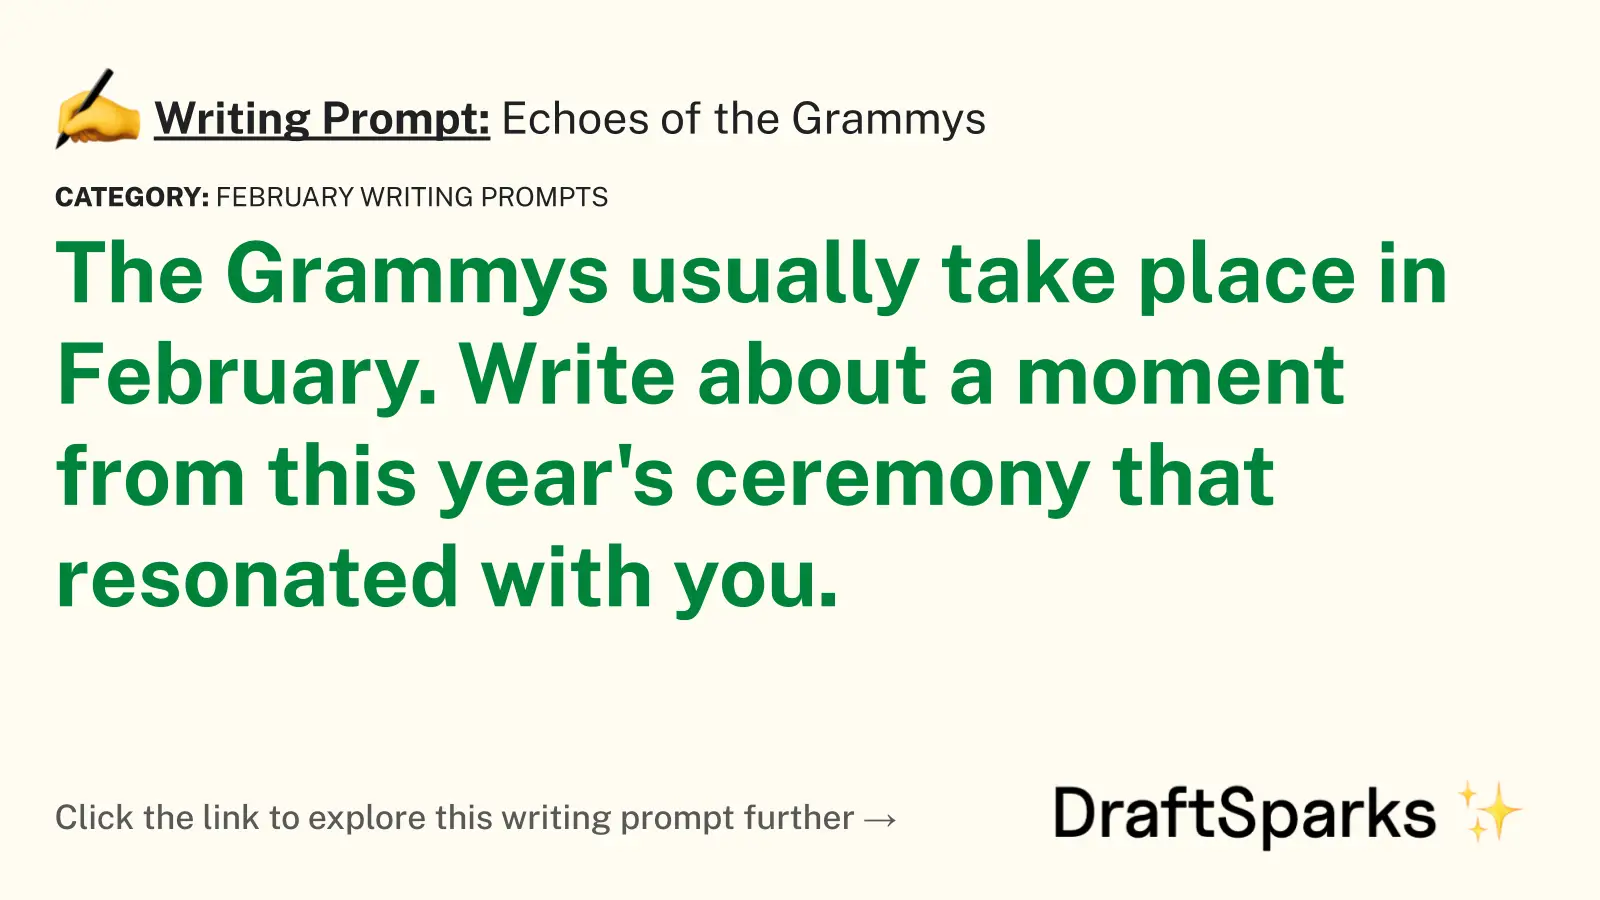 Echoes of the Grammys